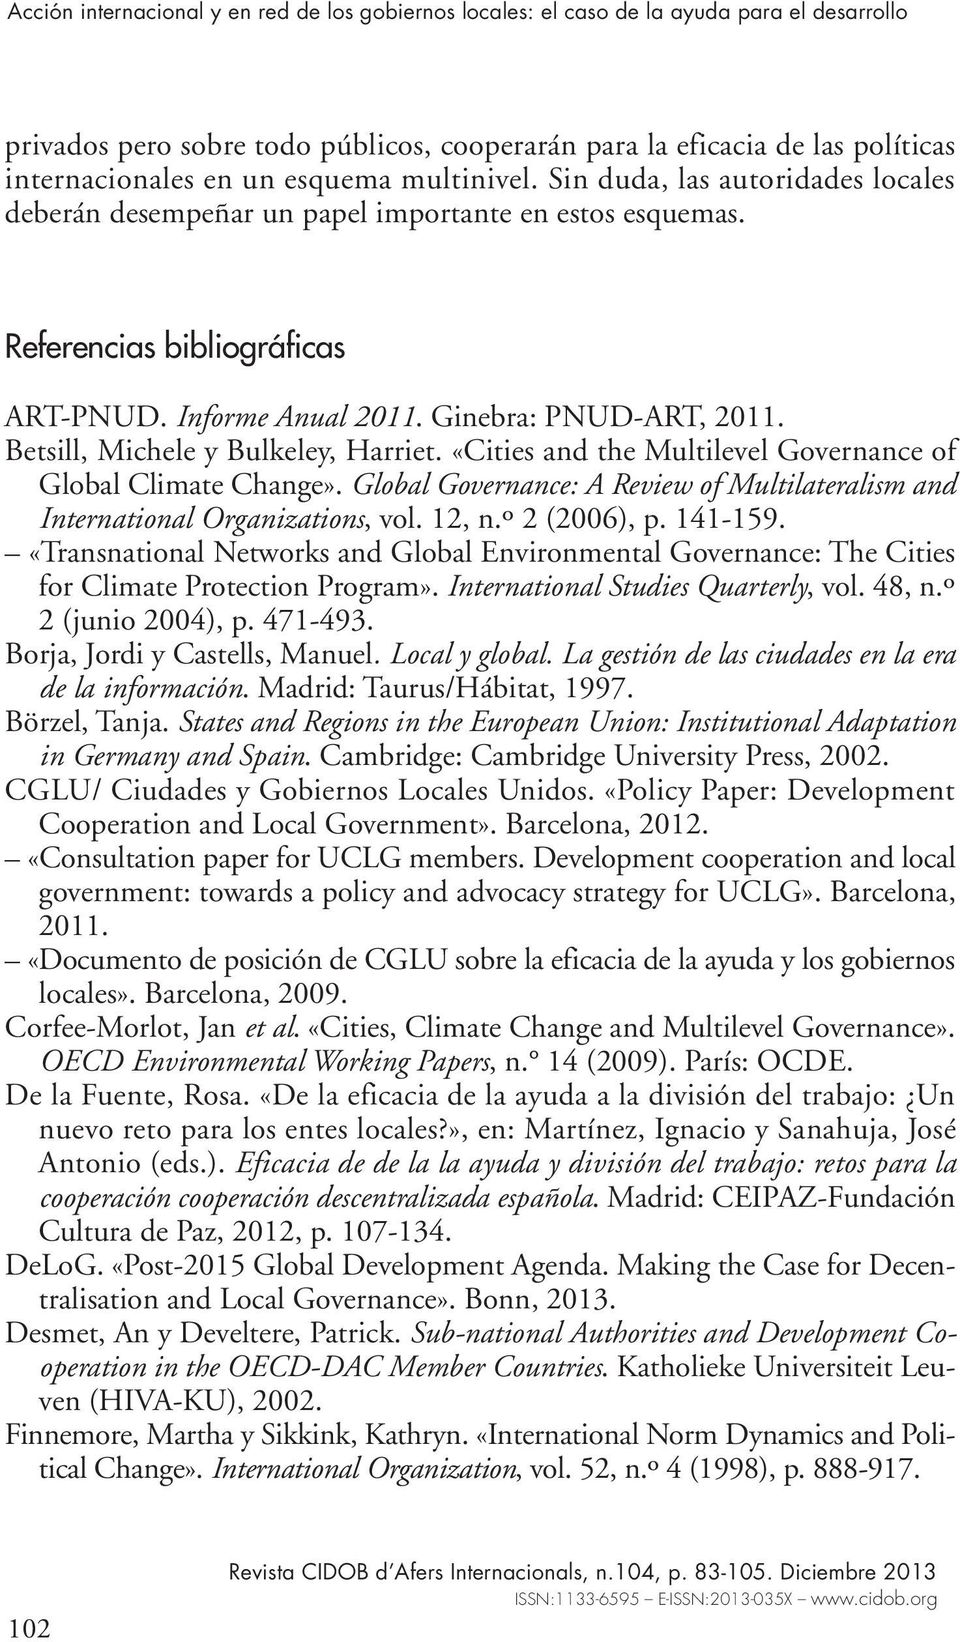 Betsill, Michele y Bulkeley, Harriet. «Cities and the Multilevel Governance of Global Climate Change». Global Governance: A Review of Multilateralism and International Organizations, vol. 12, n.